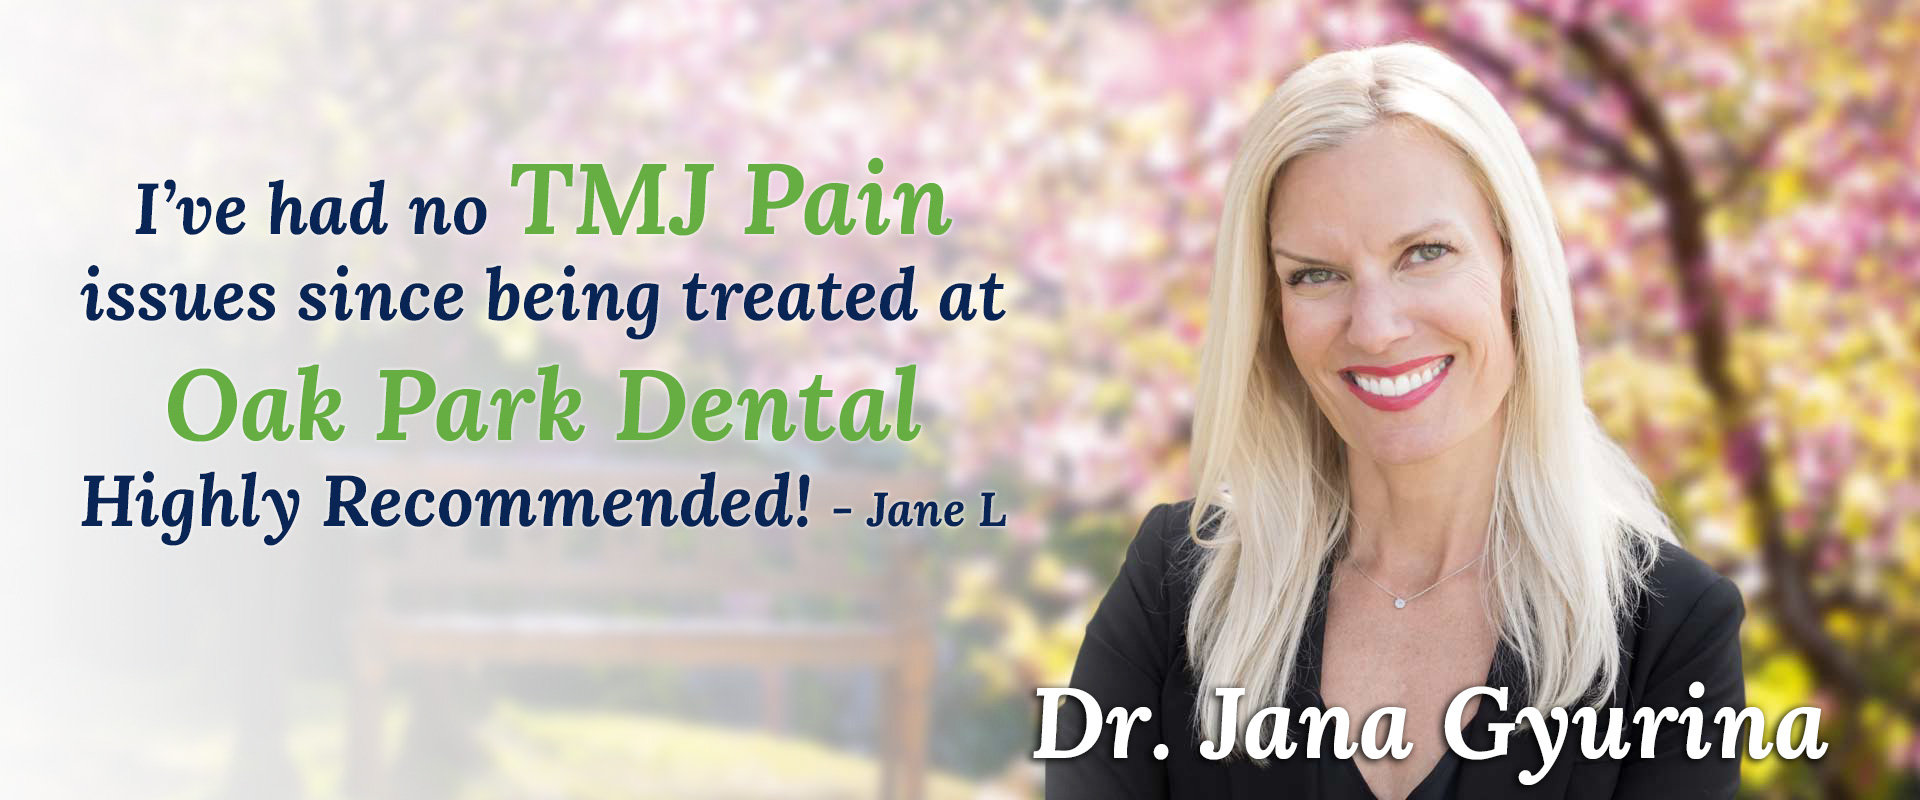 Dr. Gyurina Enhances your Life and Health with TMJ and TMD Treatment